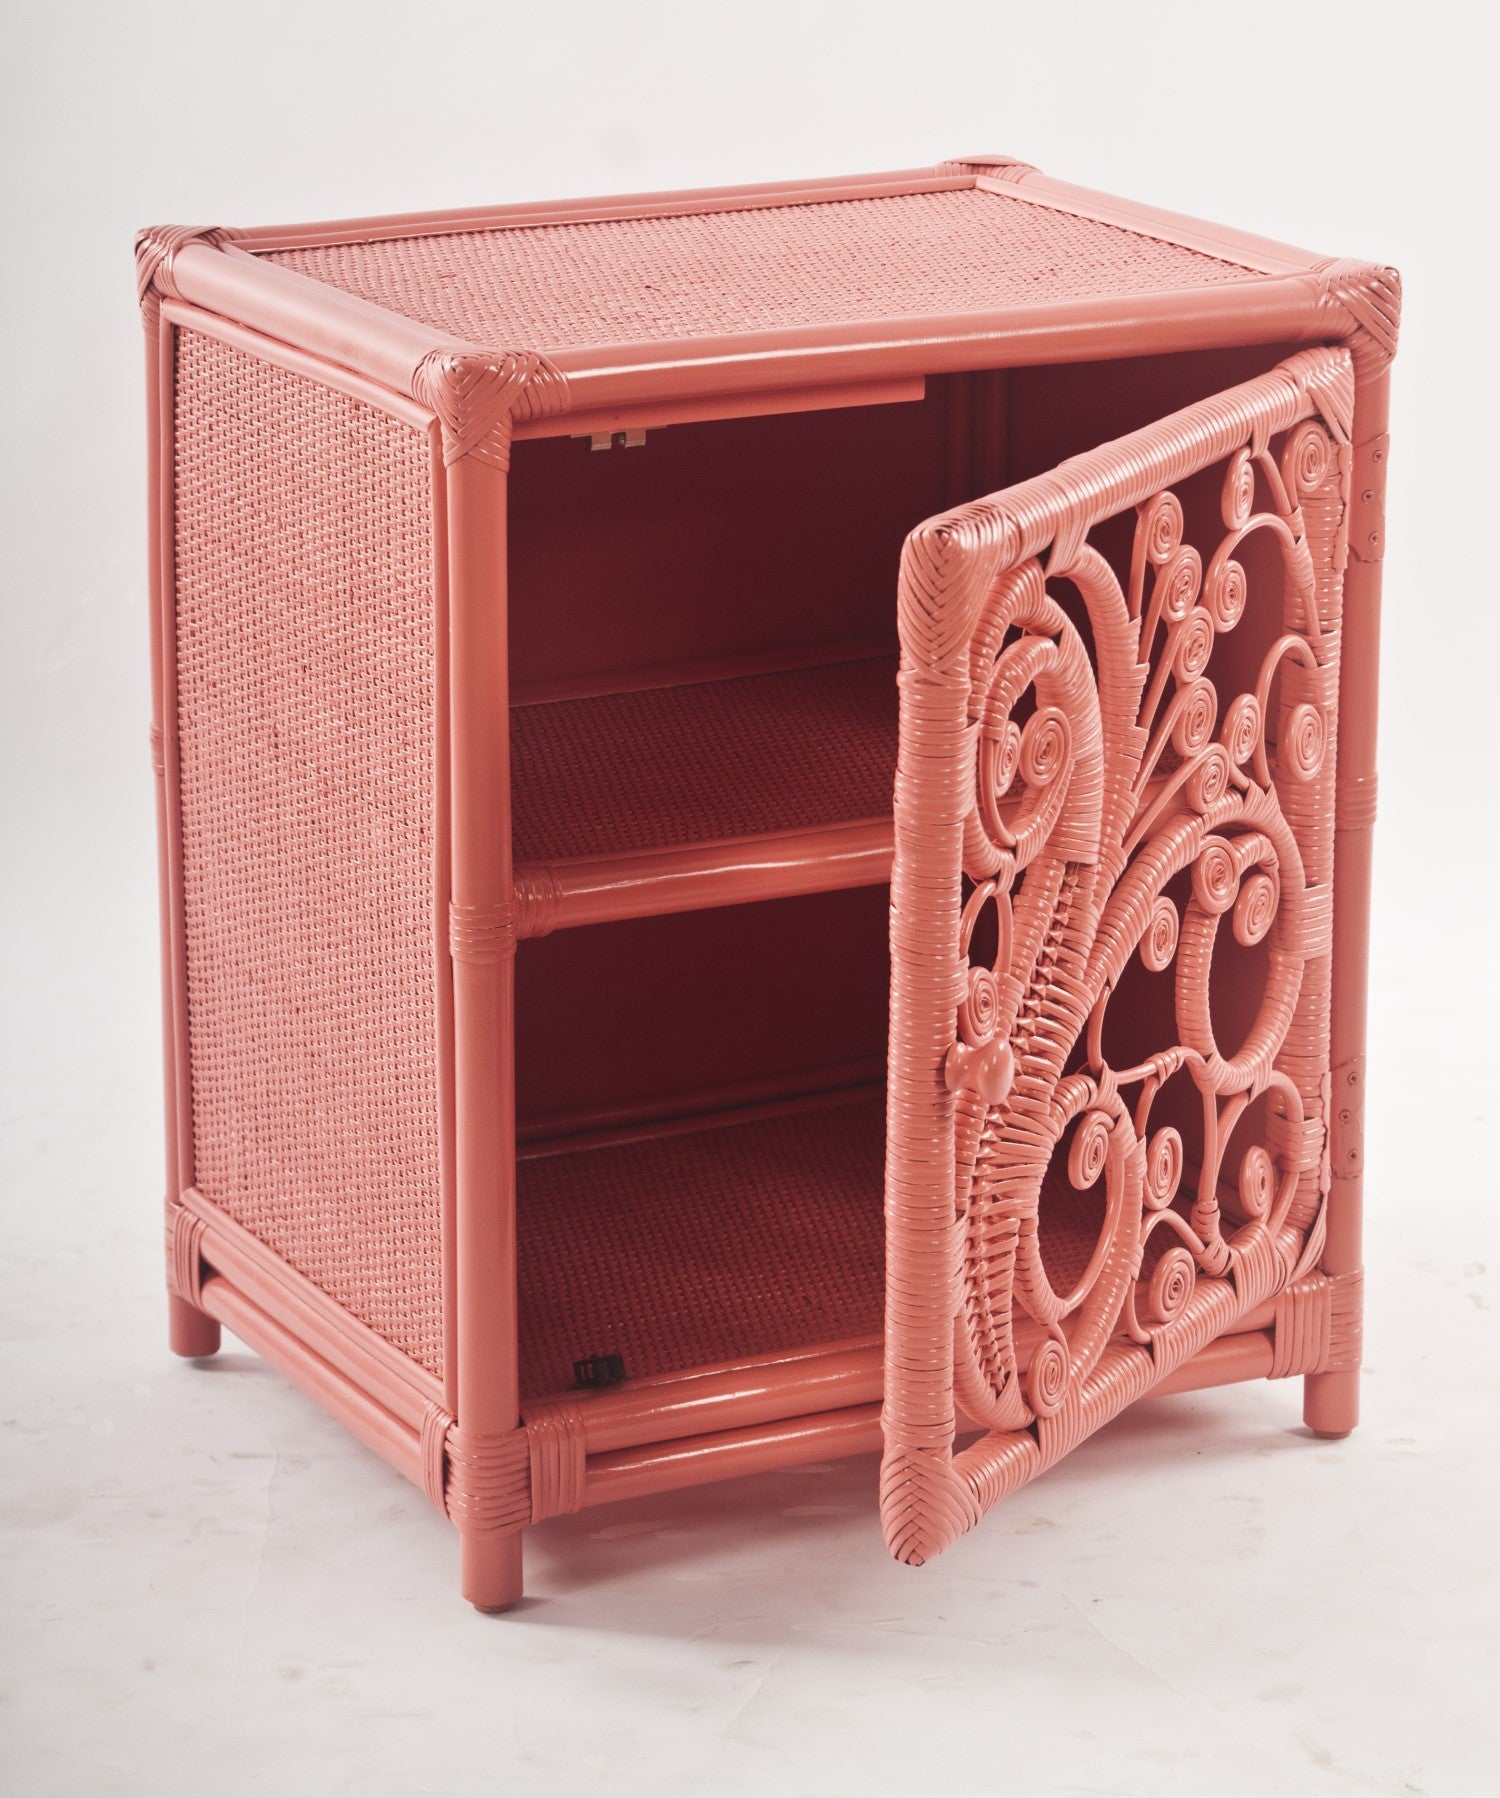 Peacock Peach Rattan Bedside Cabinet with Door Open - The Rattan Company 